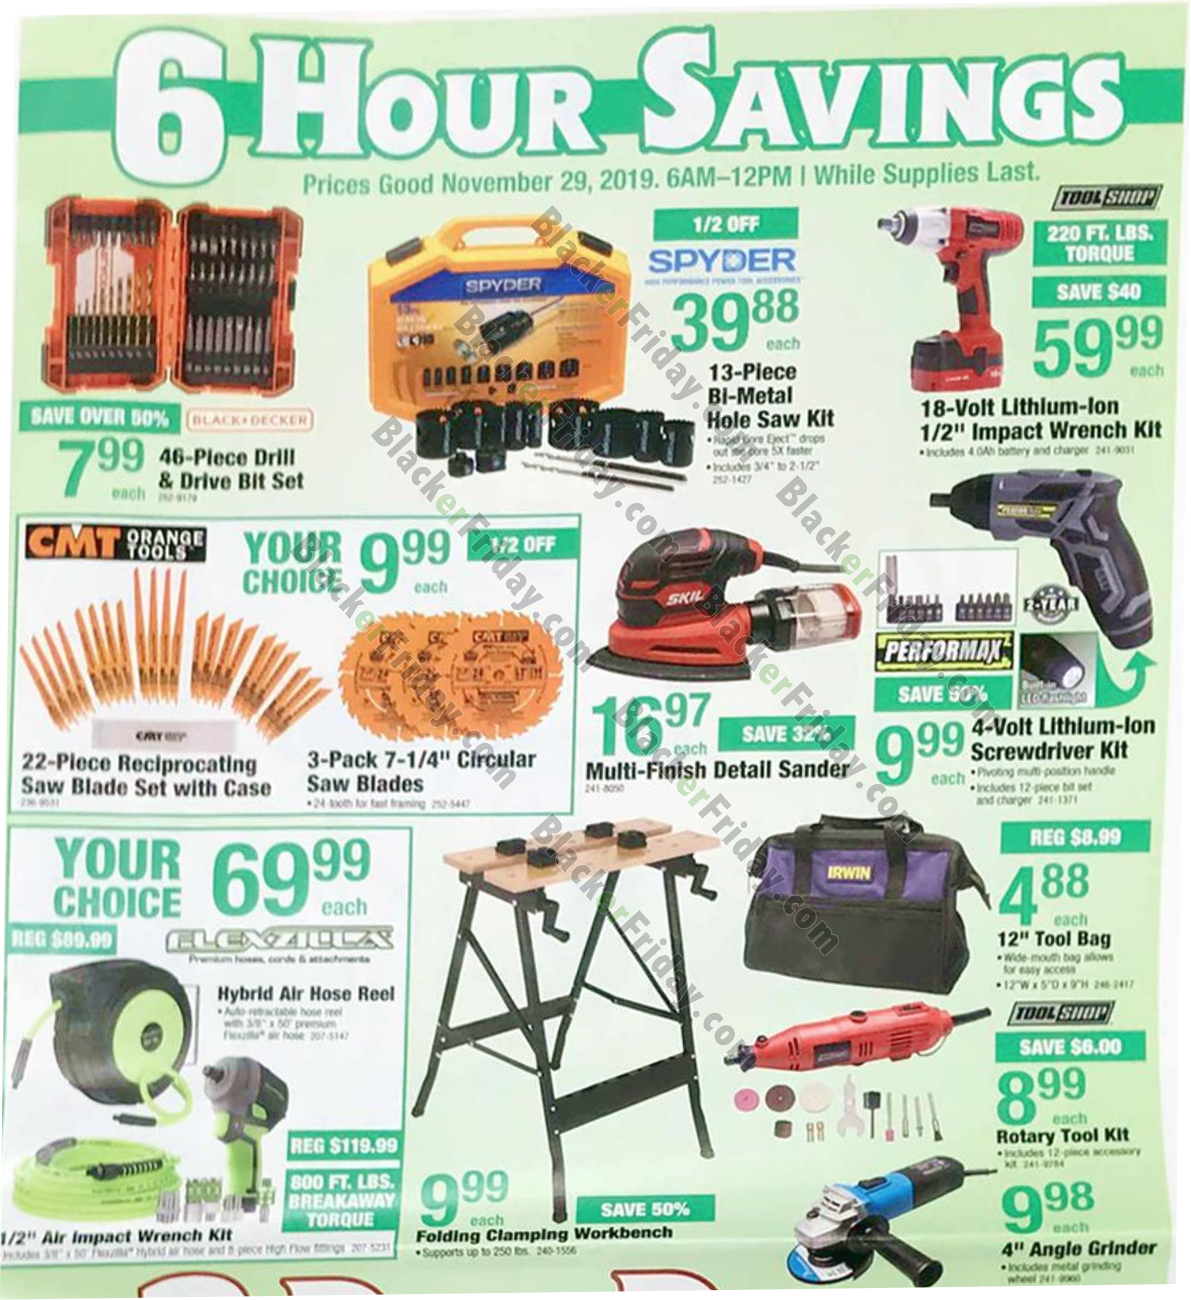 Menards Black Friday 2020 Sale - What to Expect - Blacker Friday